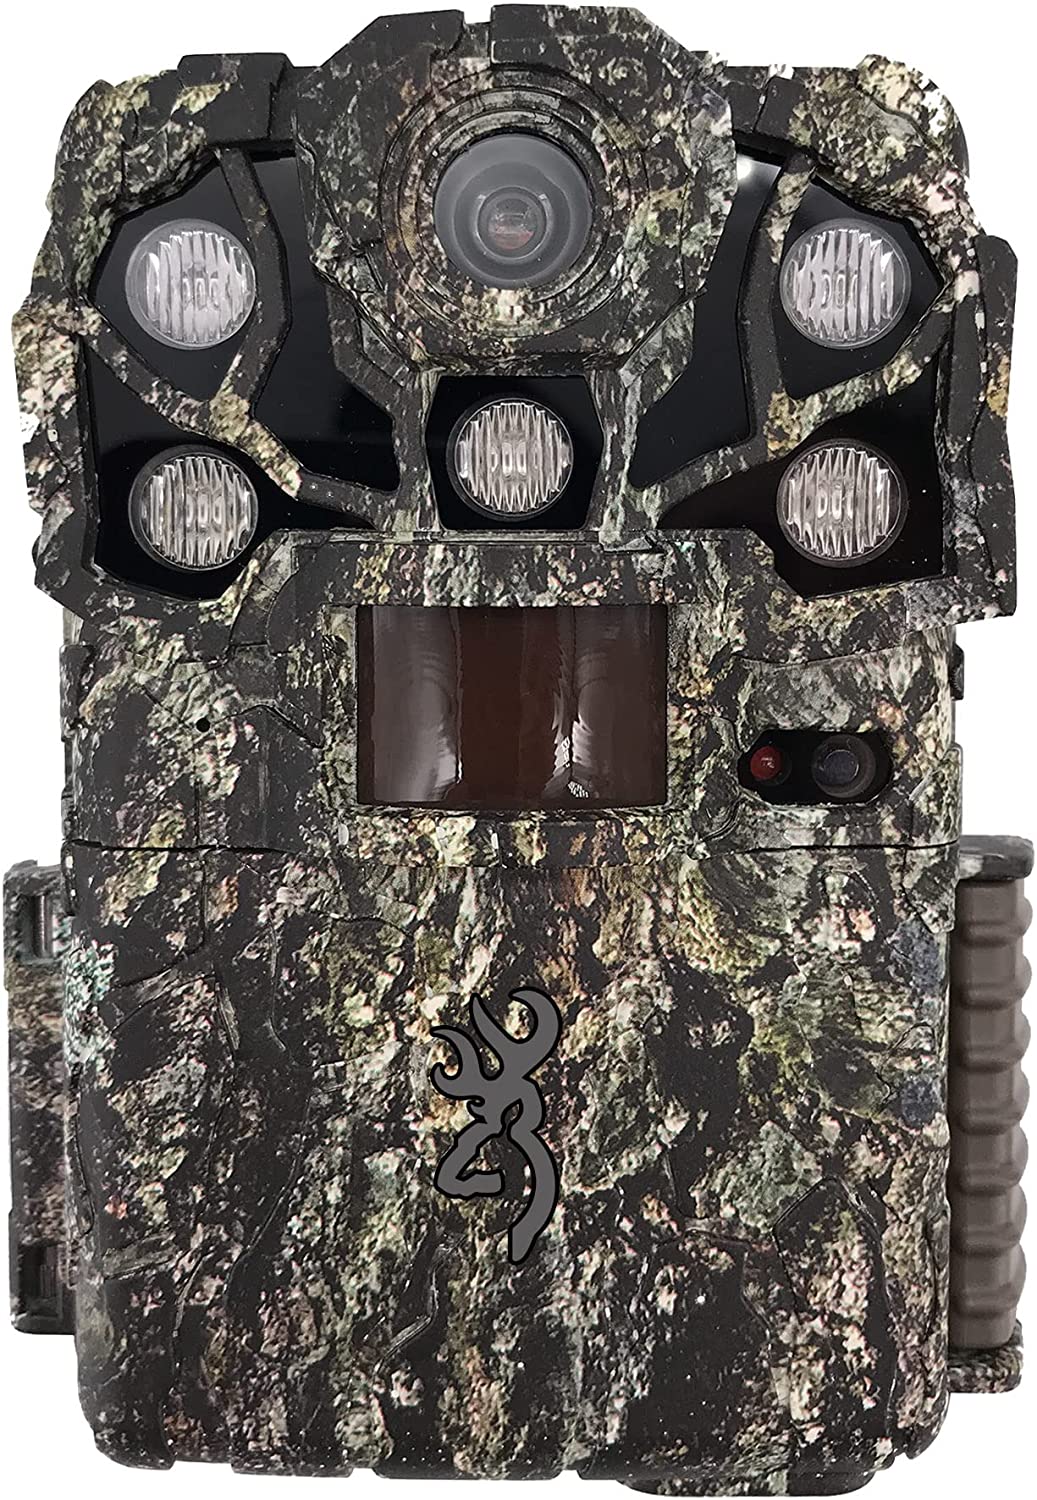 Browning Trail Camera Recon Force Elite HP5 - image 1 of 2